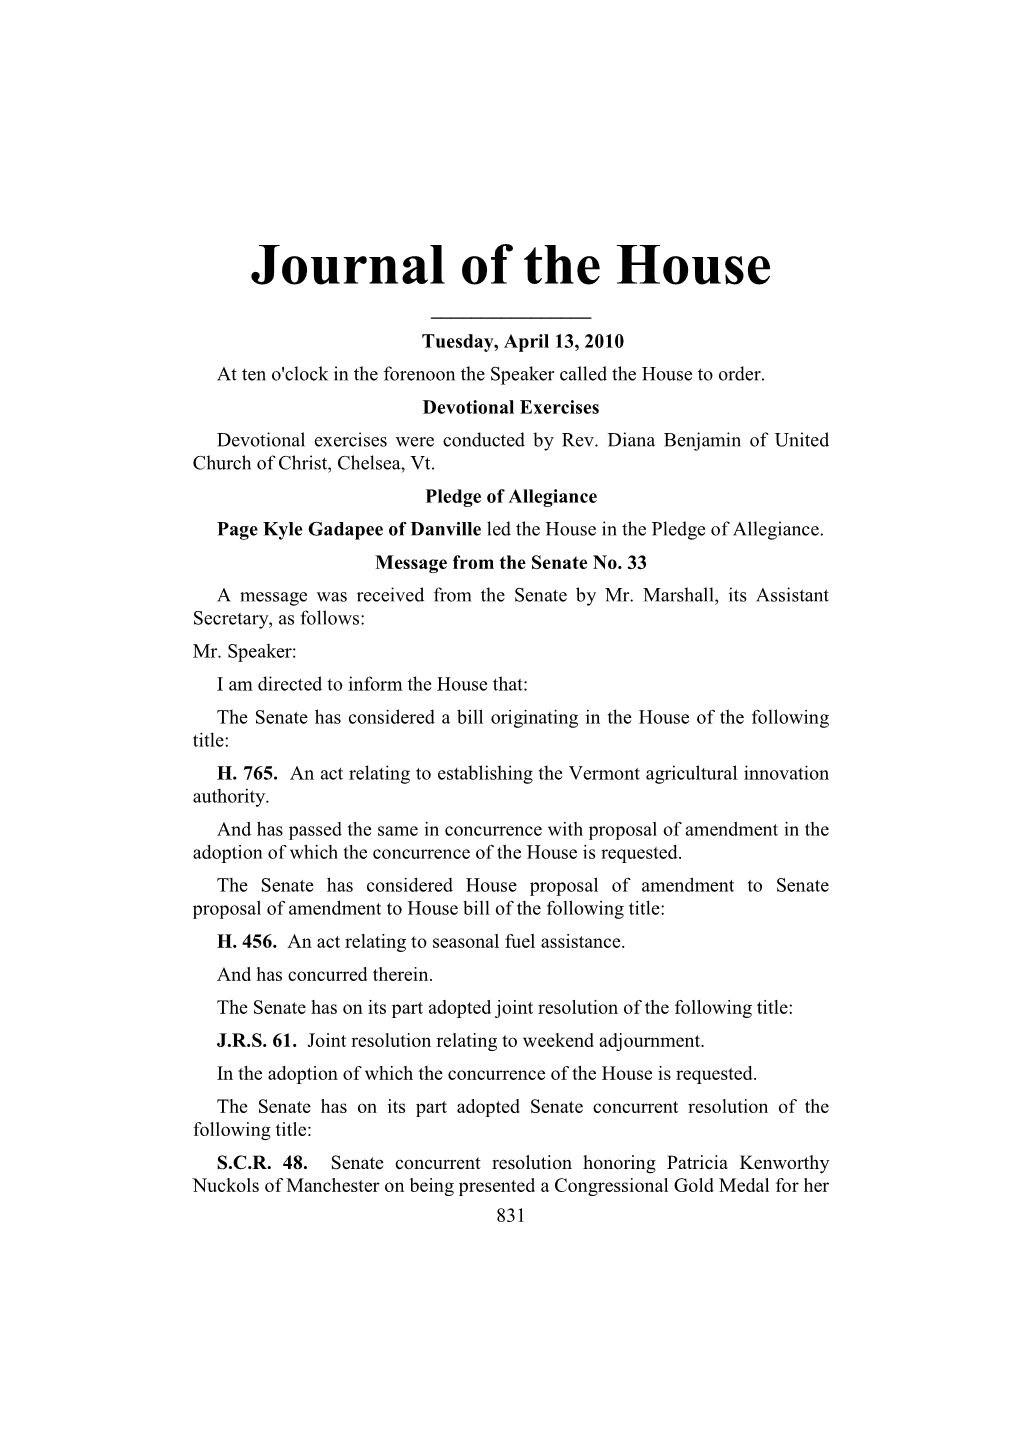 Journal of the House ______Tuesday, April 13, 2010 at Ten O'clock in the Forenoon the Speaker Called the House to Order